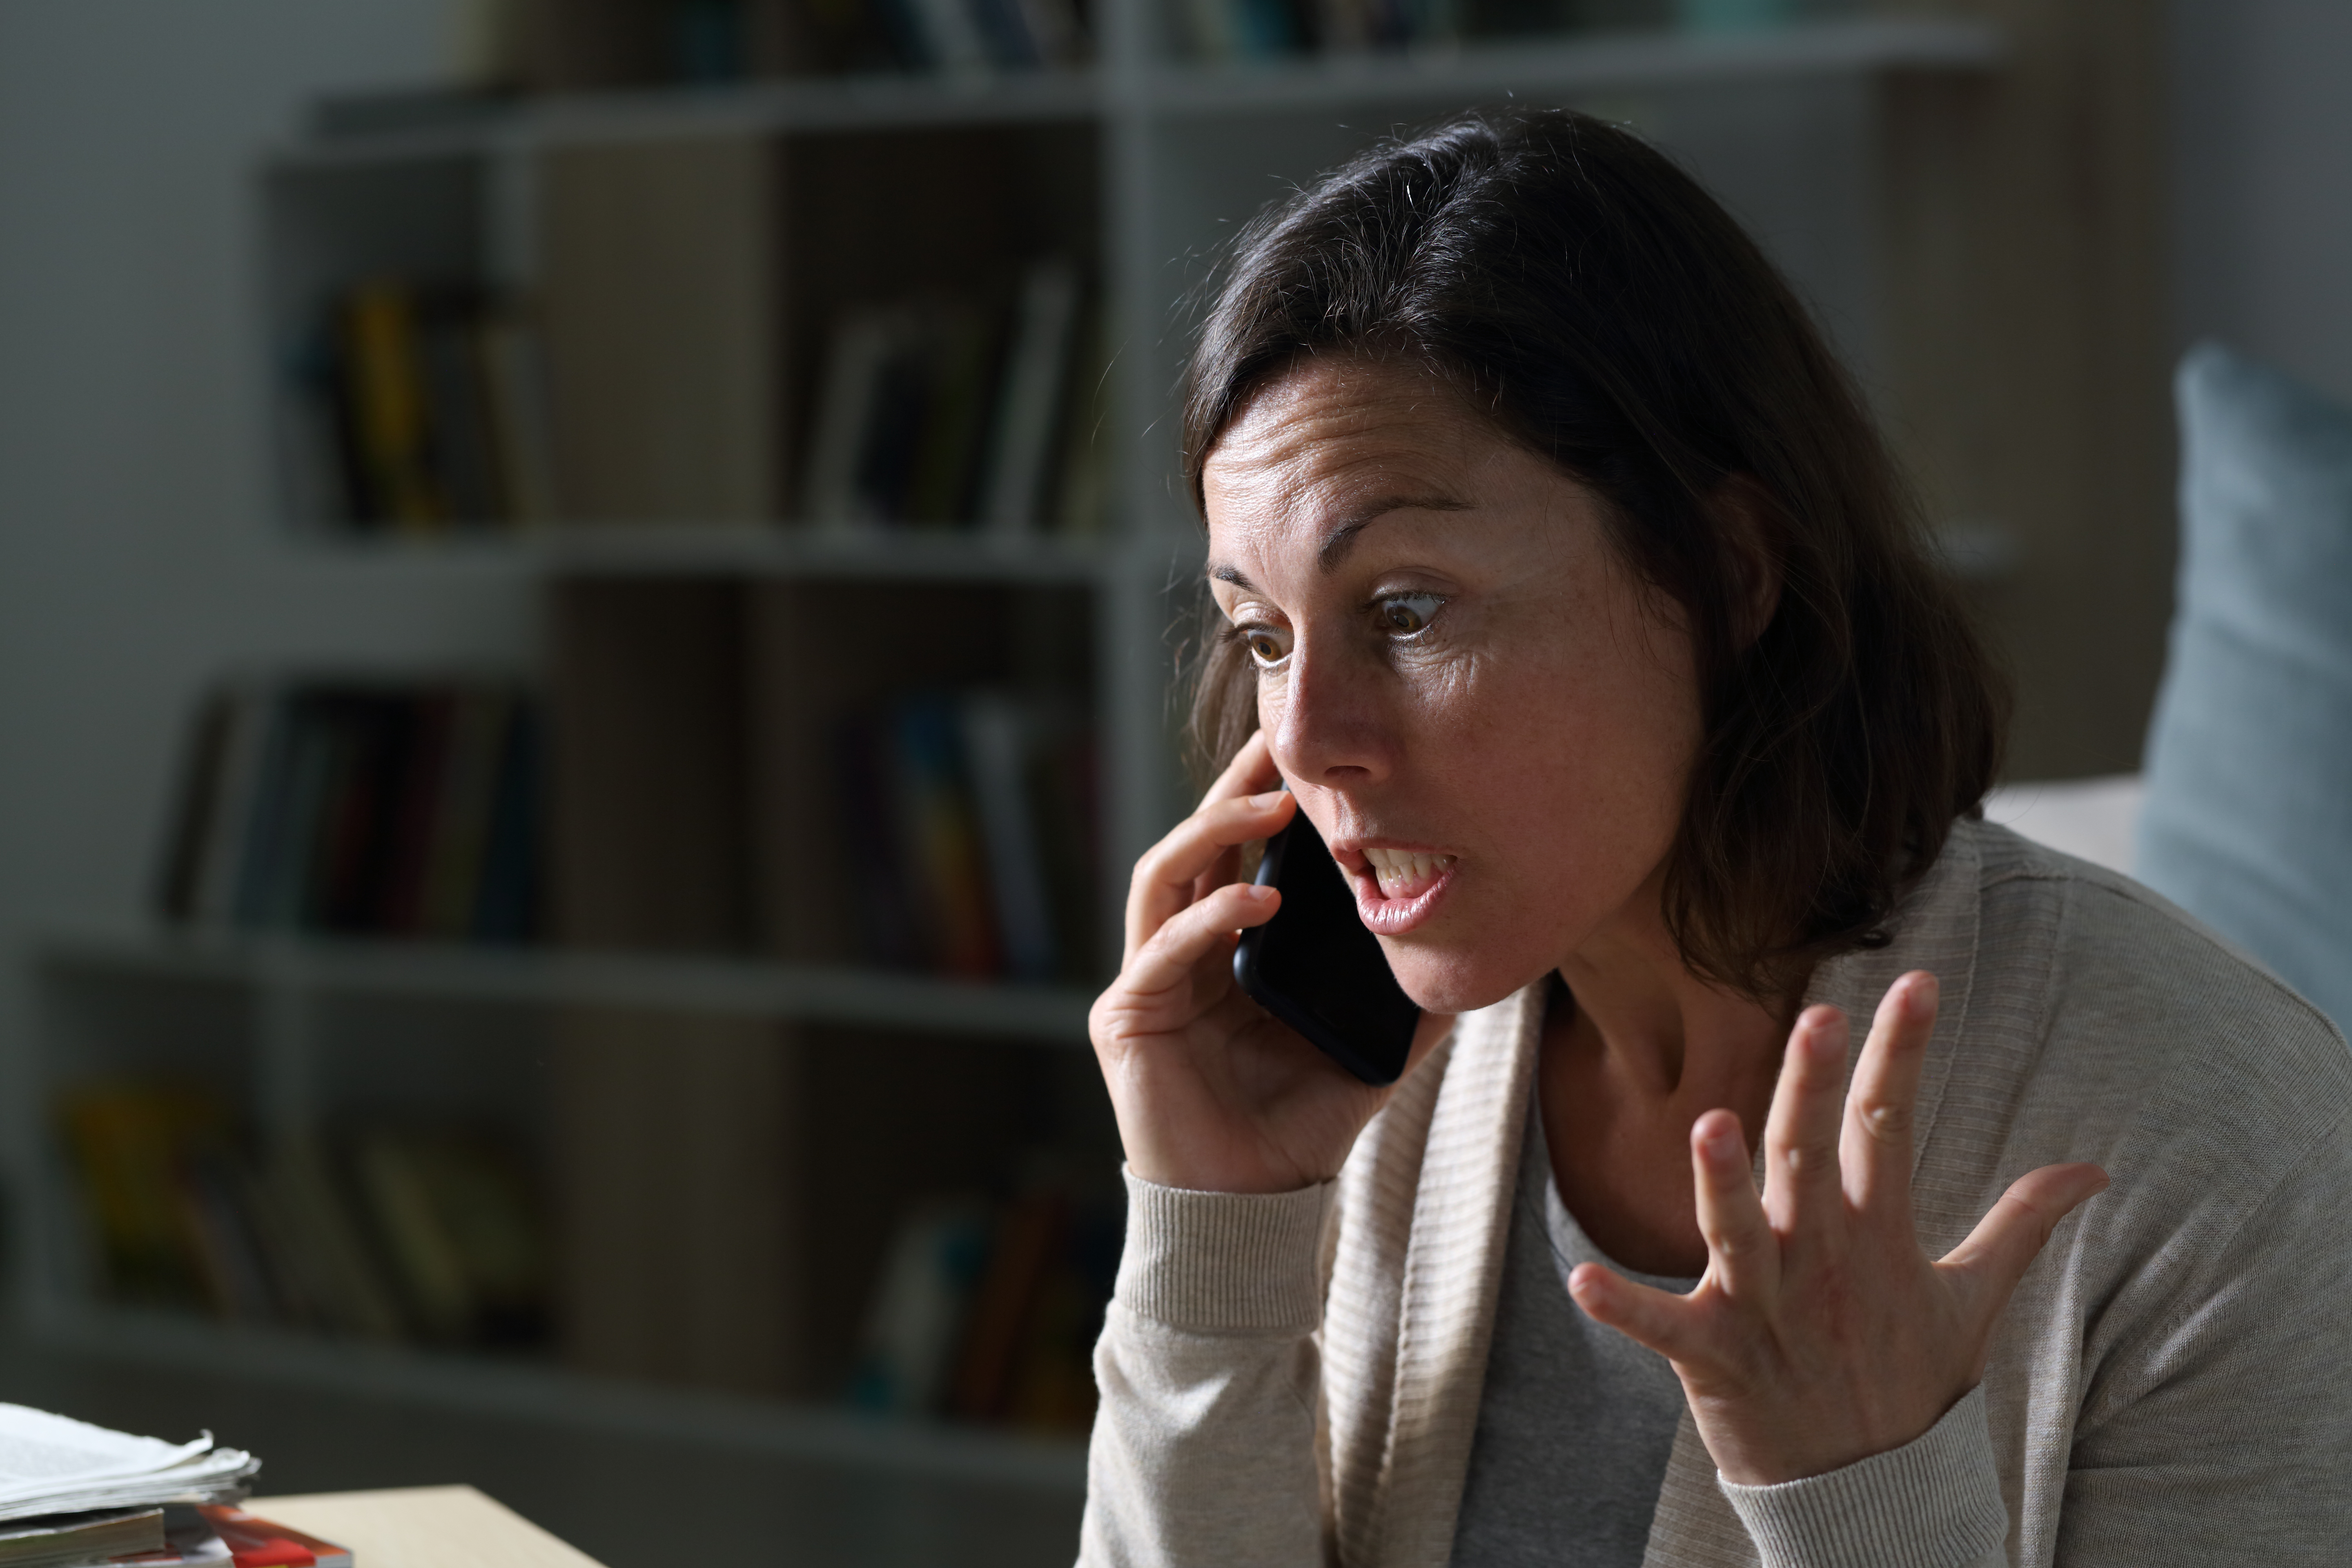 A woman looking angry while on the phone | Source: Shutterstock